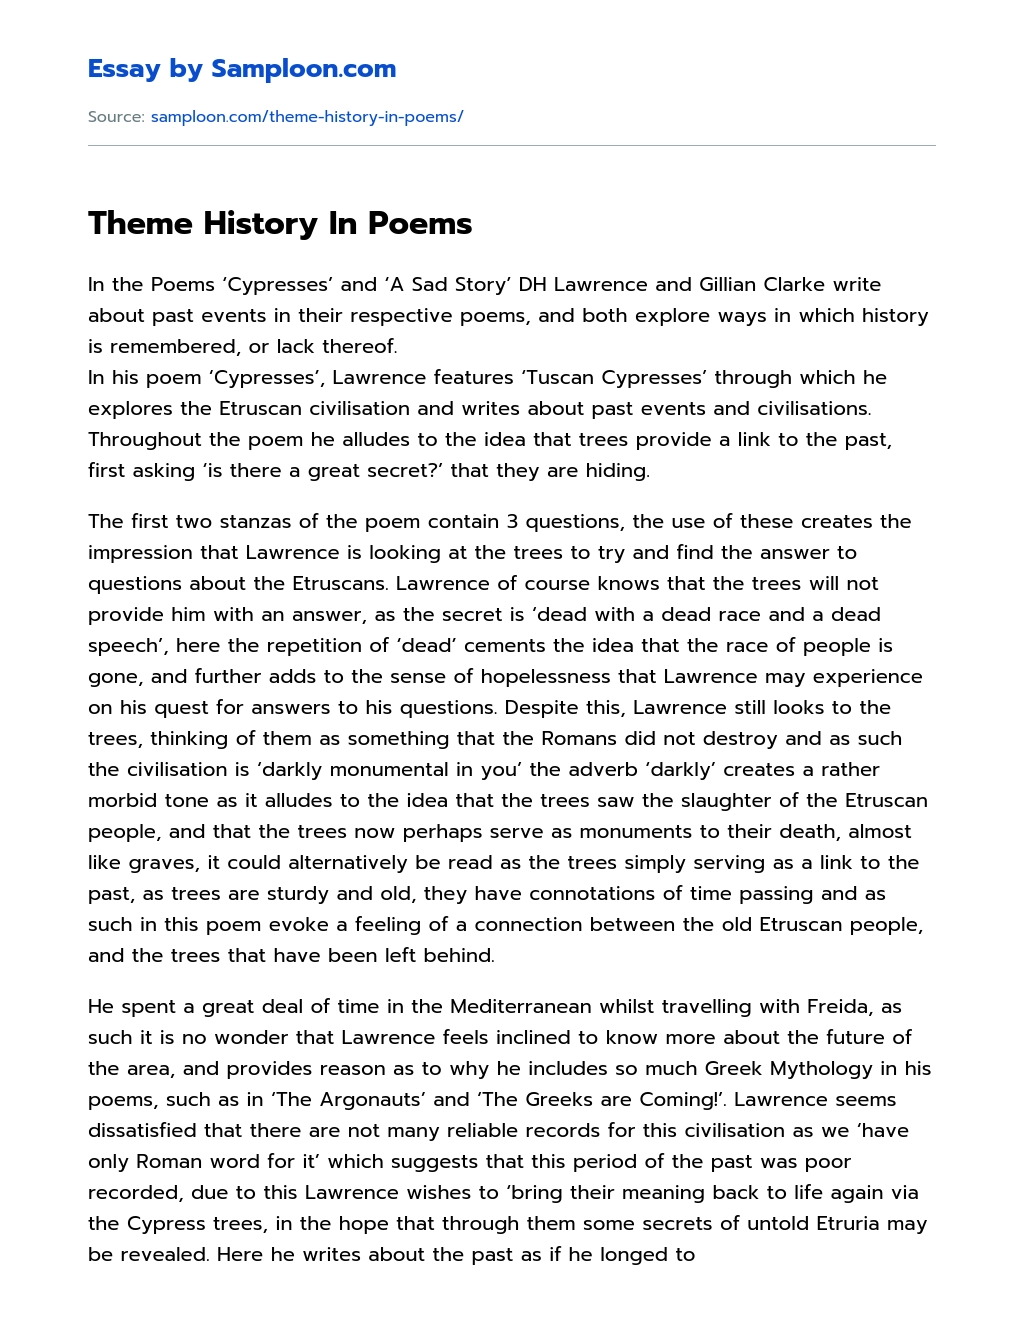 Theme History In Poems essay